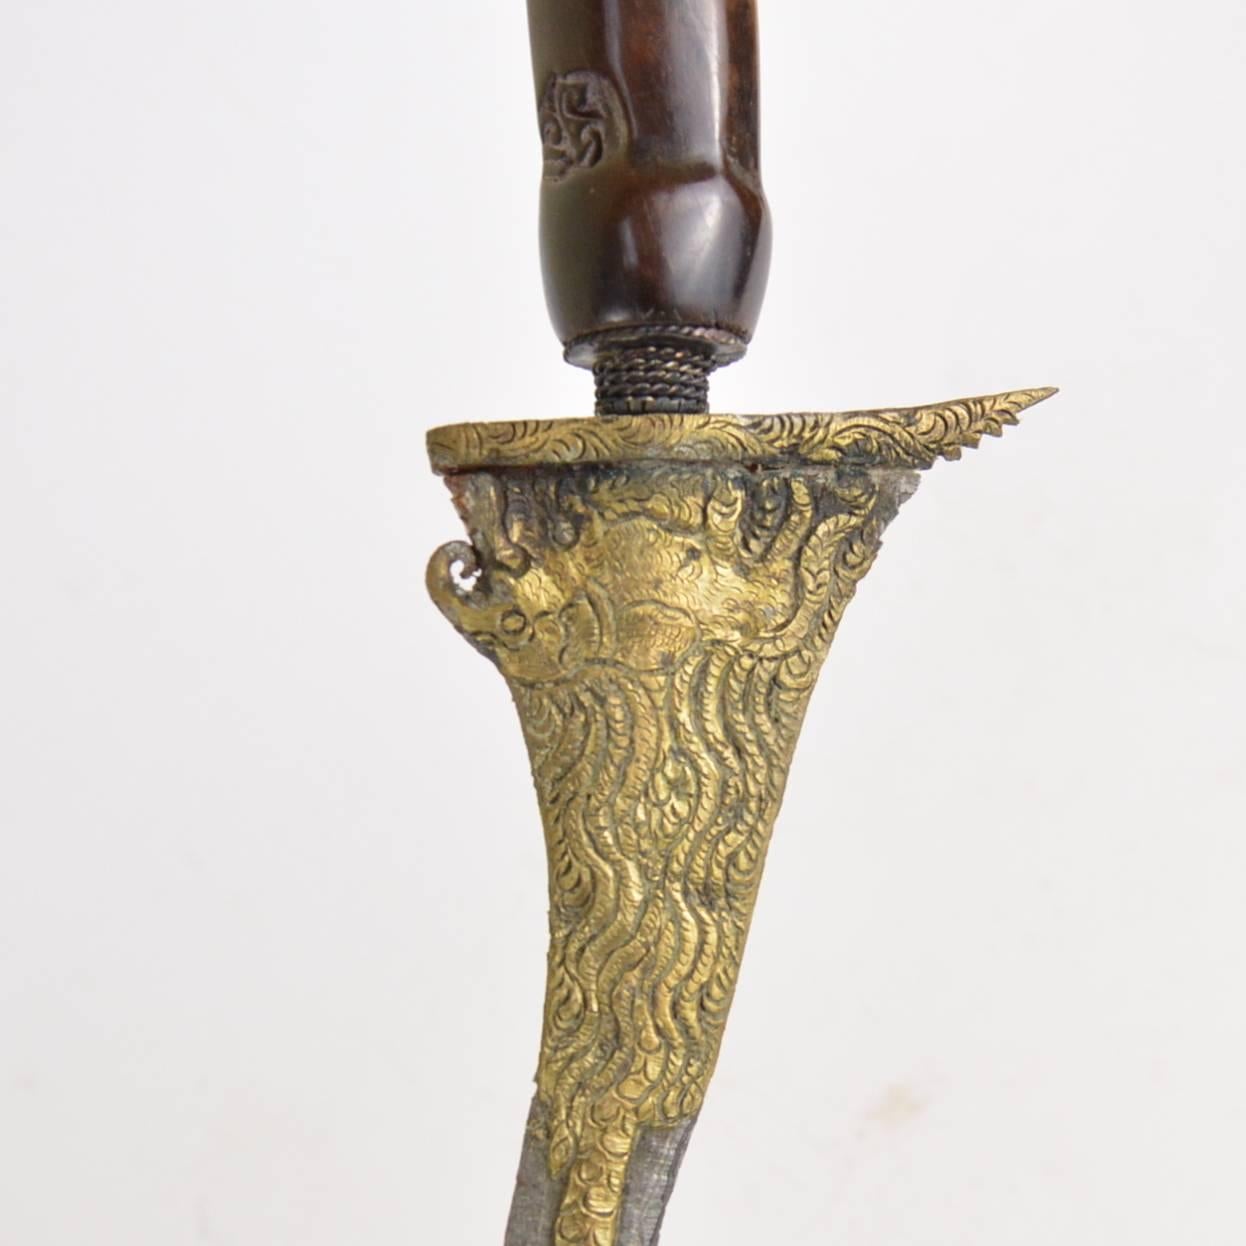 19th Century Antique Indonesian Kris Dagger with Wooden Handle